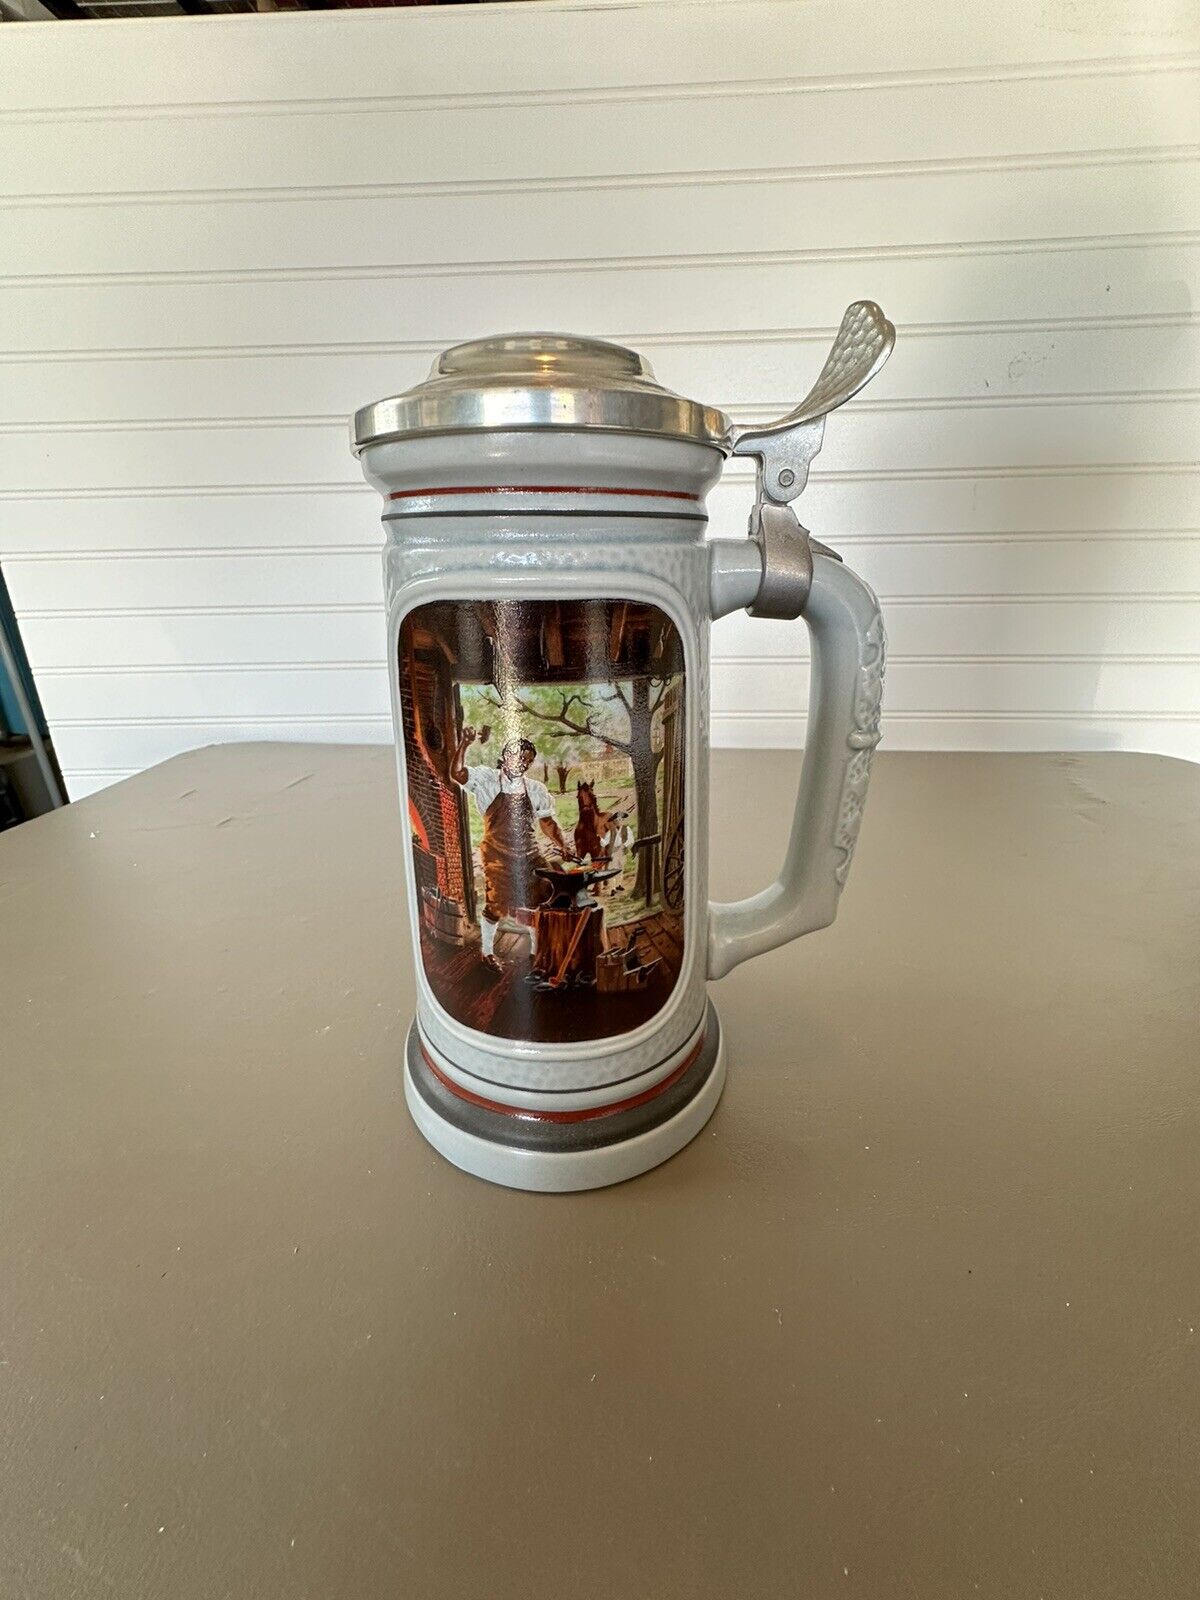 Vintage1985 AVON The Building of America Beer Stein Collection “The Blacksmith” 